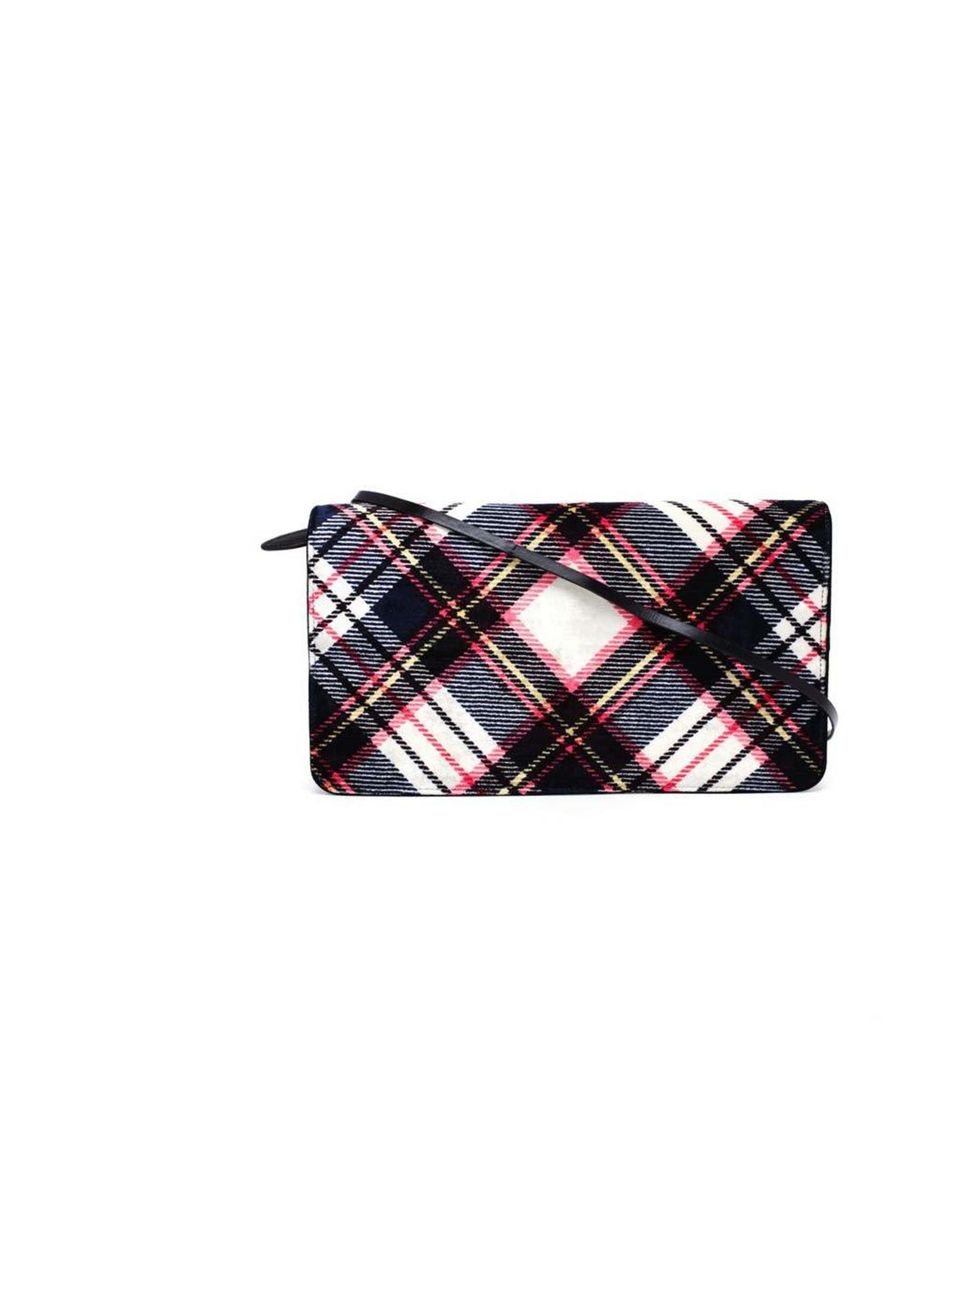 <p>this amazing checked Dries Van Noten clutch, £455 at <a href="http://www.brownsfashion.com/product/LB3O35680004/193/tartan-velvet-clutch-bag">browns</a> is a must on this outfit</p>